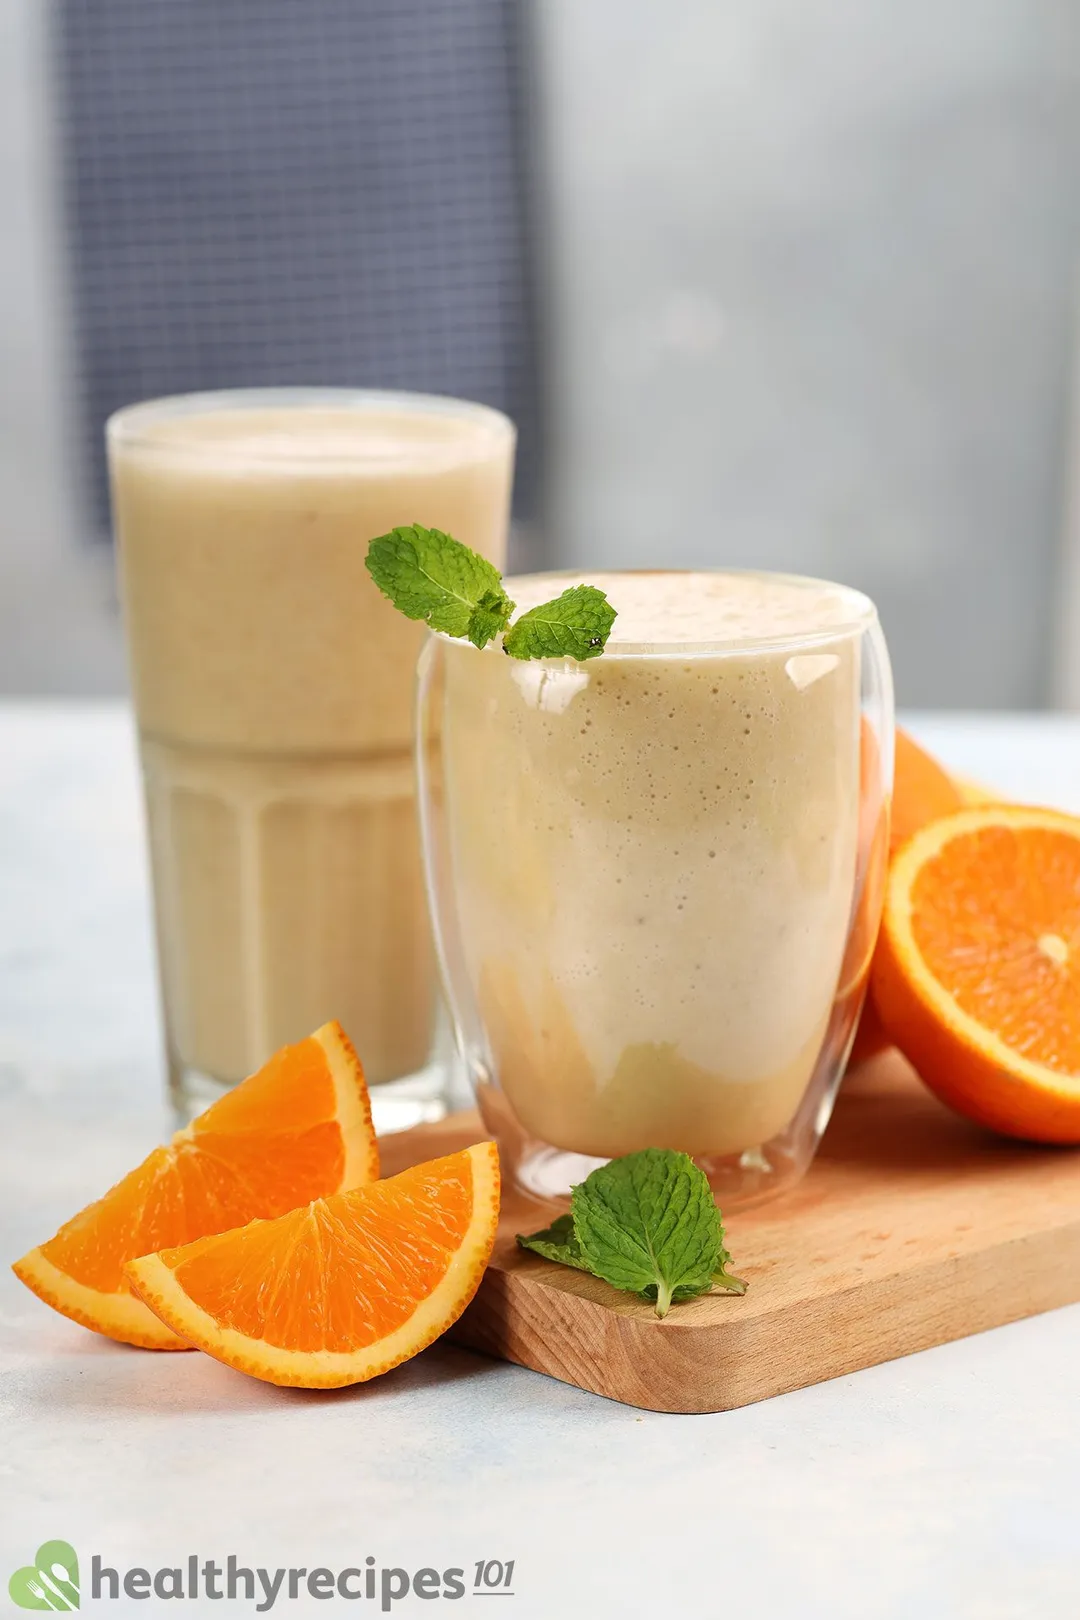 Two glasses of Orange Banana Smoothie placed on a wooden board and near orange slices.